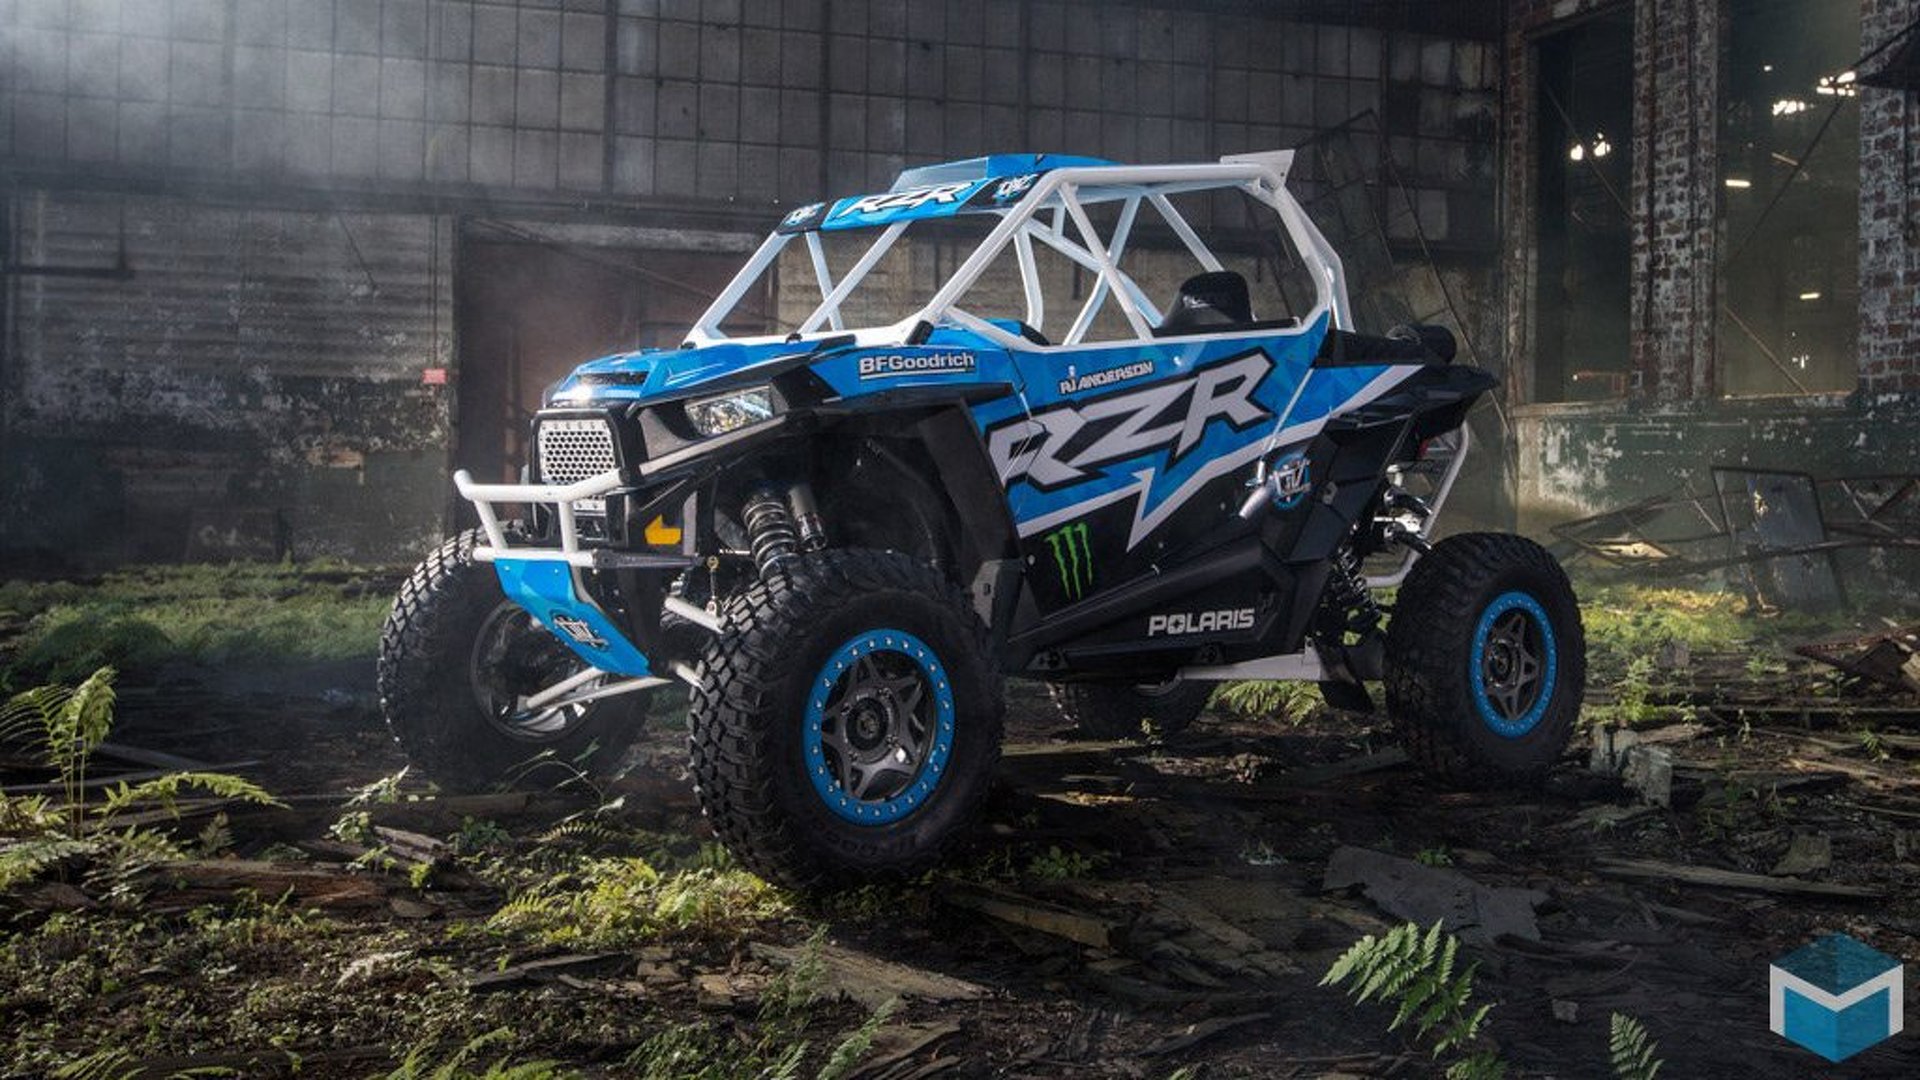 Polaris RZR stunt video bloopers are fun to watch